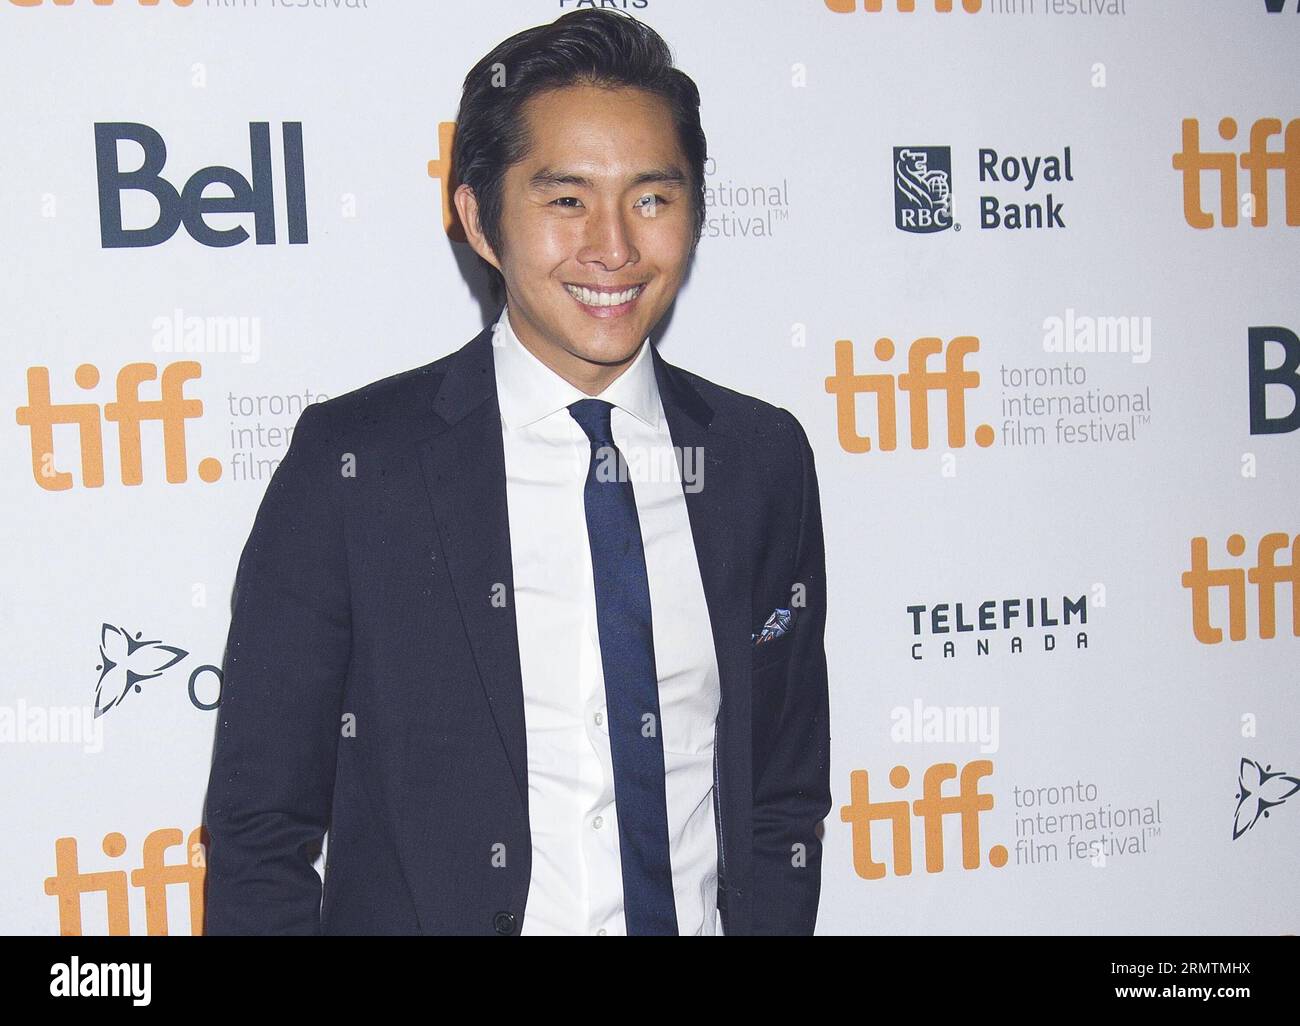 (140911) -- TORONTO,  -- Actor Justin Chon poses for photos before the world premiere of the film Revenge of The Green Dragons at Ryerson Theater during the 39th Toronto International Film Festival in Toronto, Canada, Sept. 10, 2014. ) CANADA-TORONTO-INTERNATIONAL FILM FESTIVAL-FILM REVENGE OF THE GREEN DRAGONS ZouxZheng PUBLICATIONxNOTxINxCHN   Toronto Actor Justin Chon Poses for Photos Before The World Premiere of The Film Revenge of The Green Dragons AT Ryerson Theatre during The 39th Toronto International Film Festival in Toronto Canada Sept 10 2014 Canada Toronto International Film Festiv Stock Photo